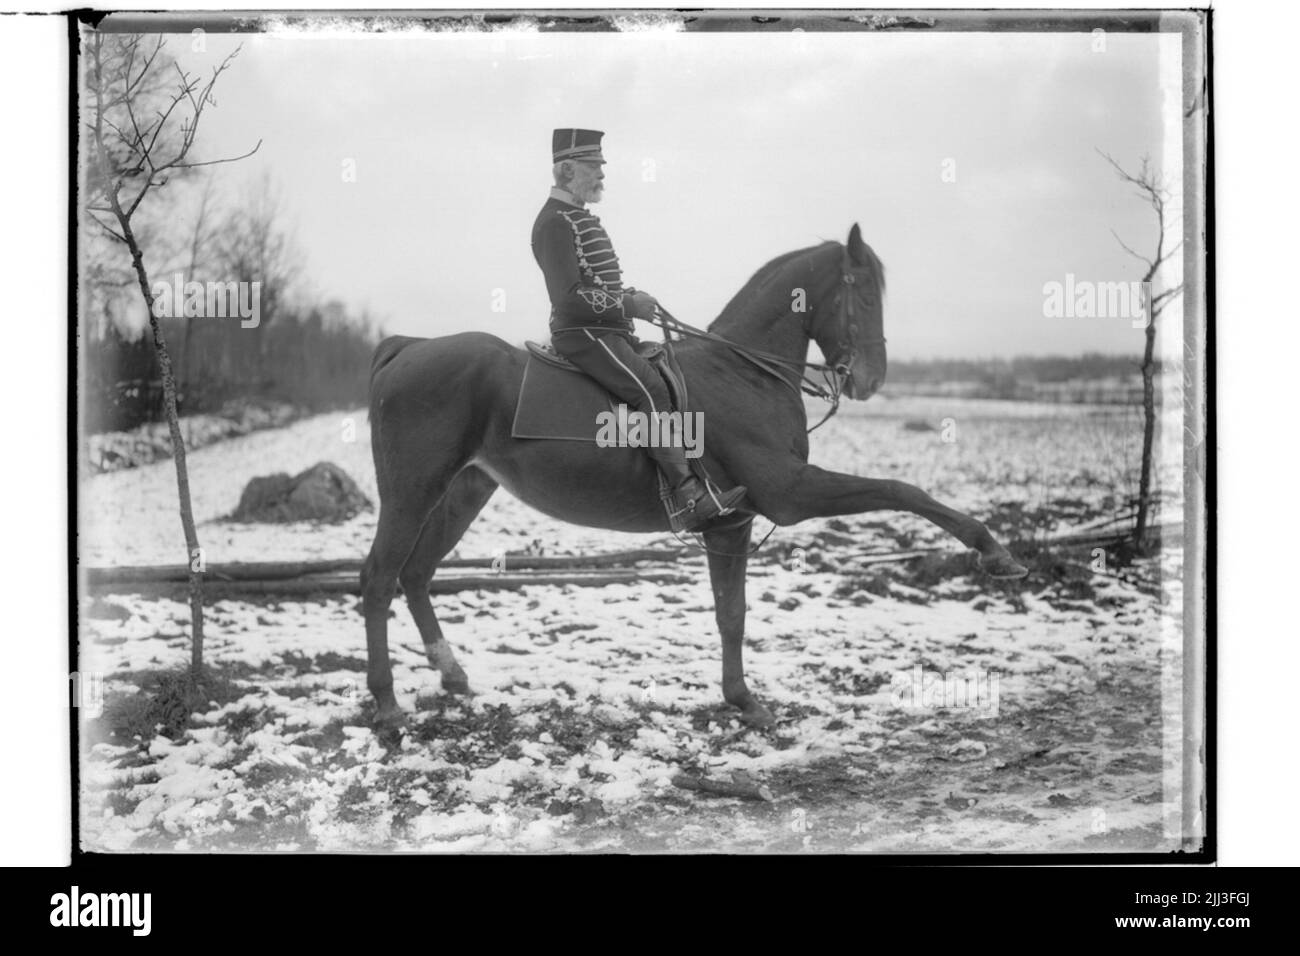 Rider for horse rider r.m. Blackling Stock Photo